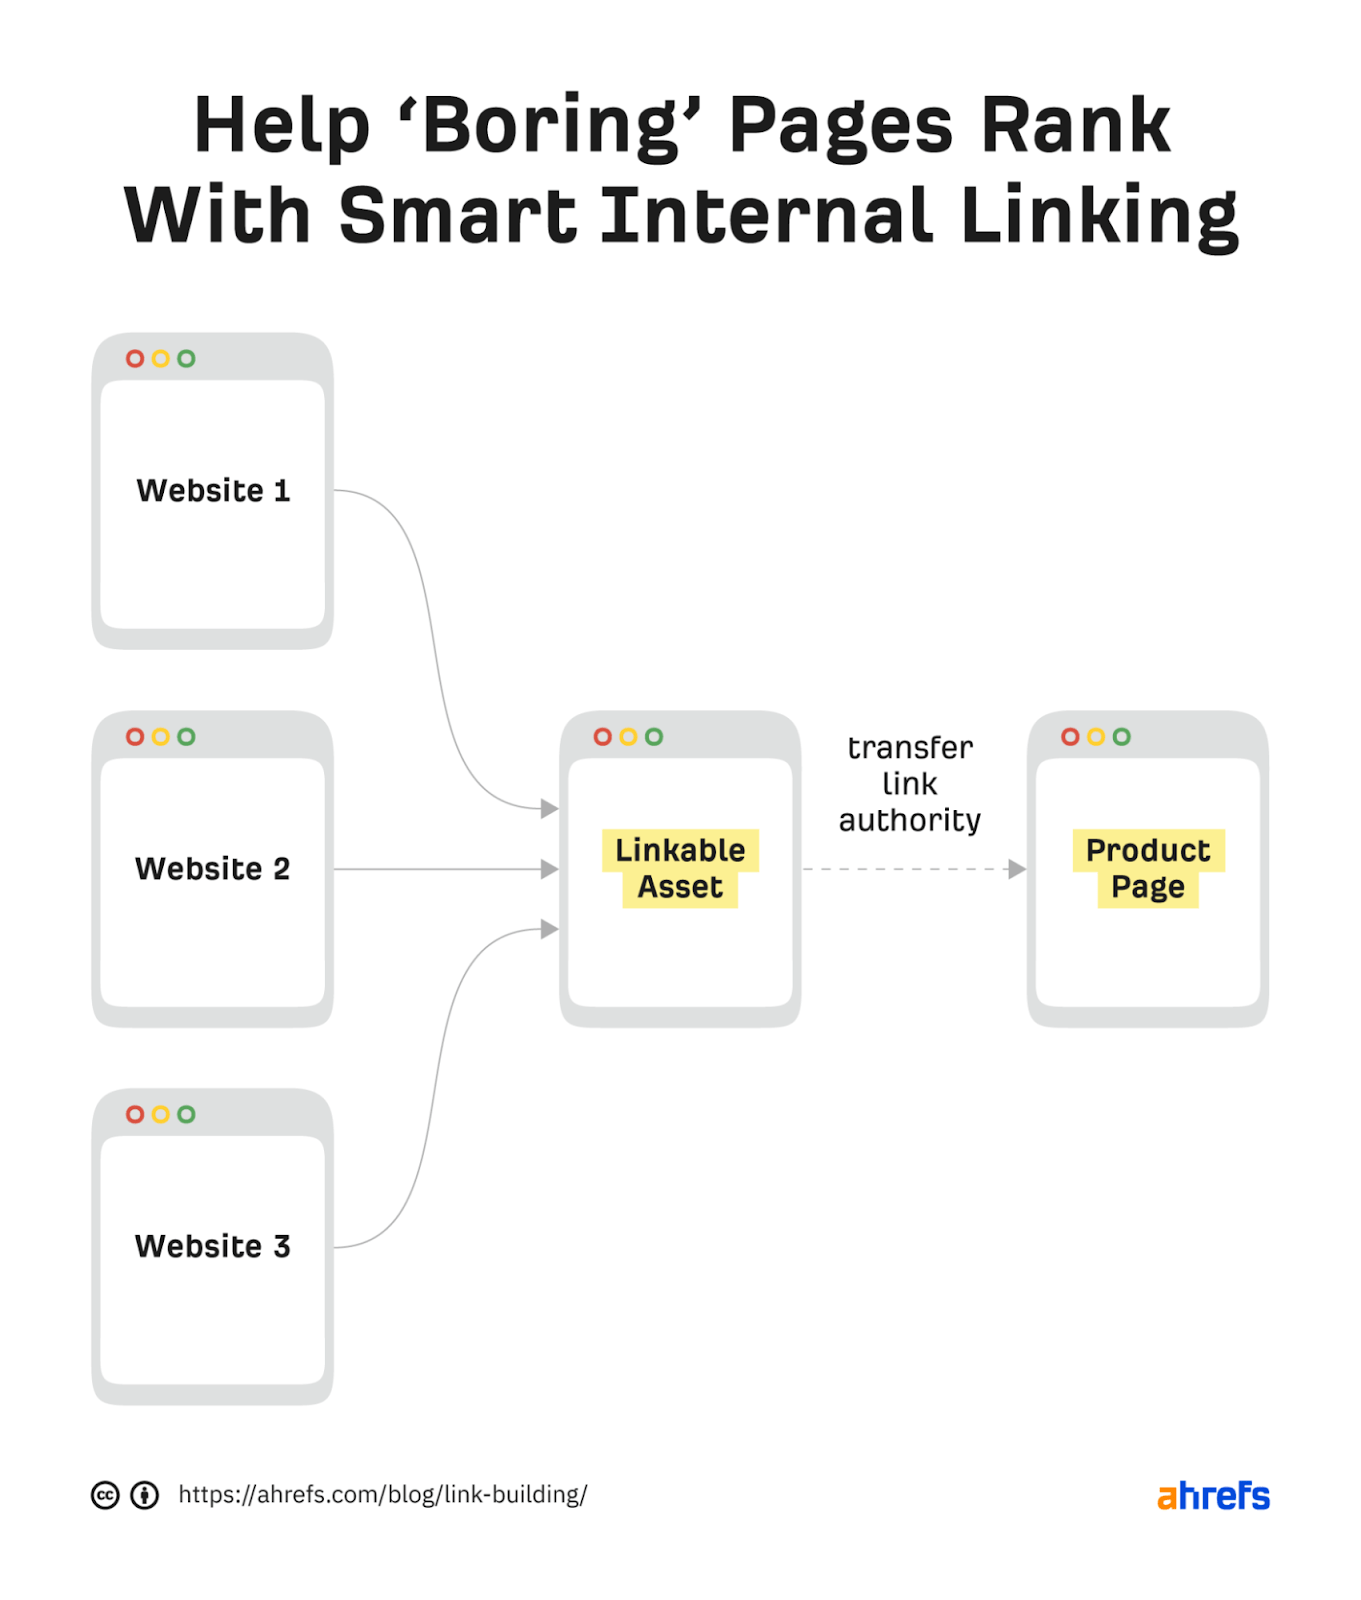 Flowchart showing more "linkable" webpage can transfer link authority to product page through internal links